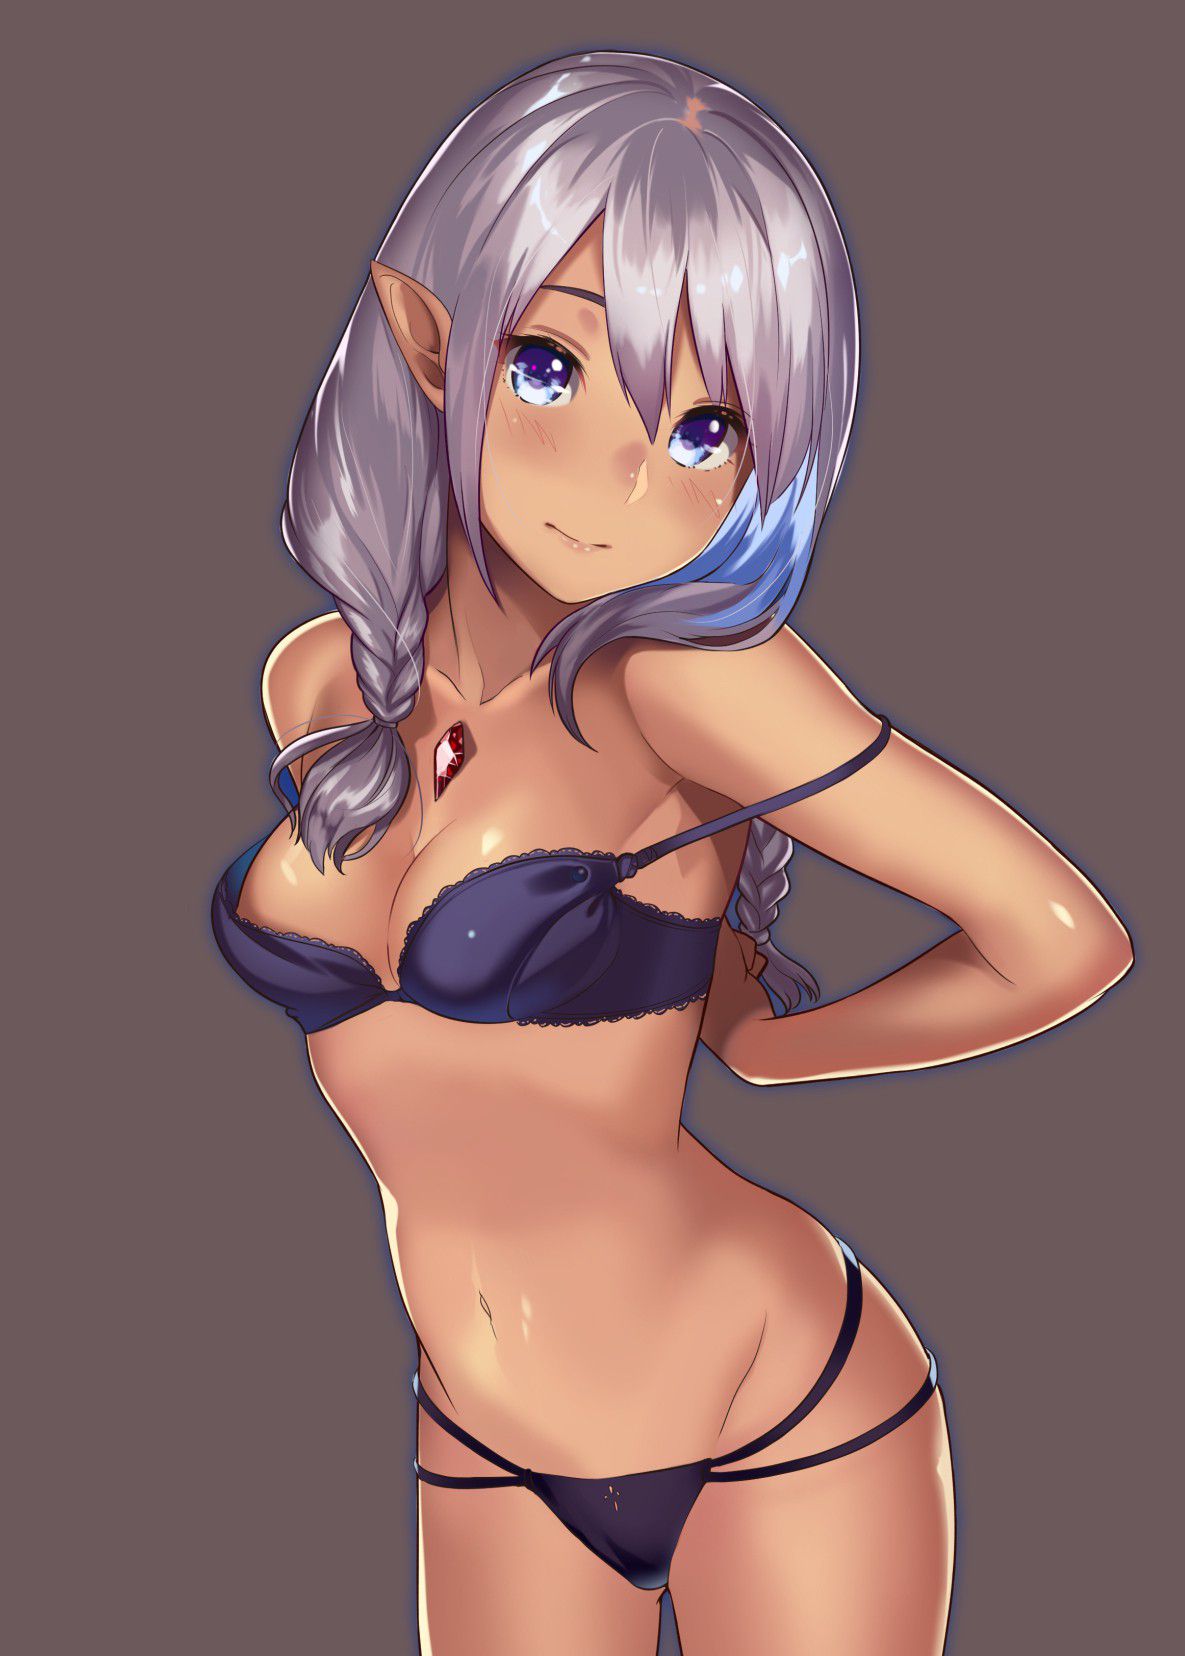 Naughty secondary image of a defenseless girl in underwear wwww 35